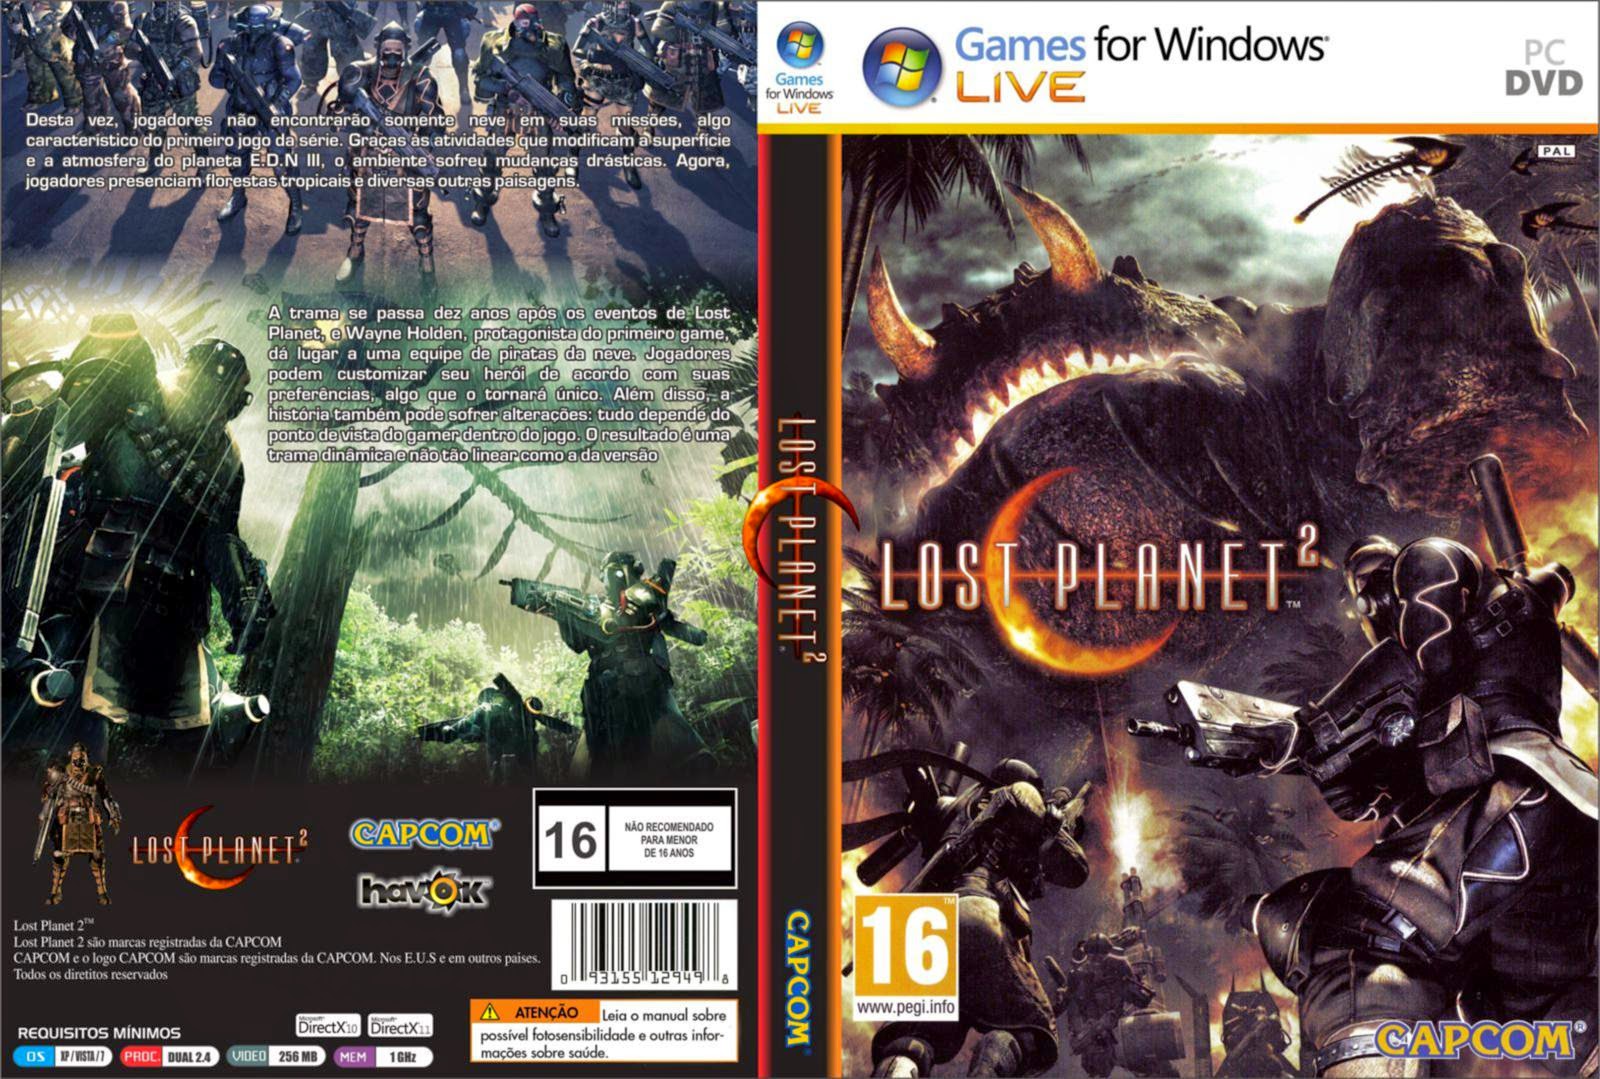 2 pc com. Lost Planet 2 диск. Lost Planet 2 для ps3 обложка. Lost Planet 2 обложка игры. Диск Lost Planet 6 игр.